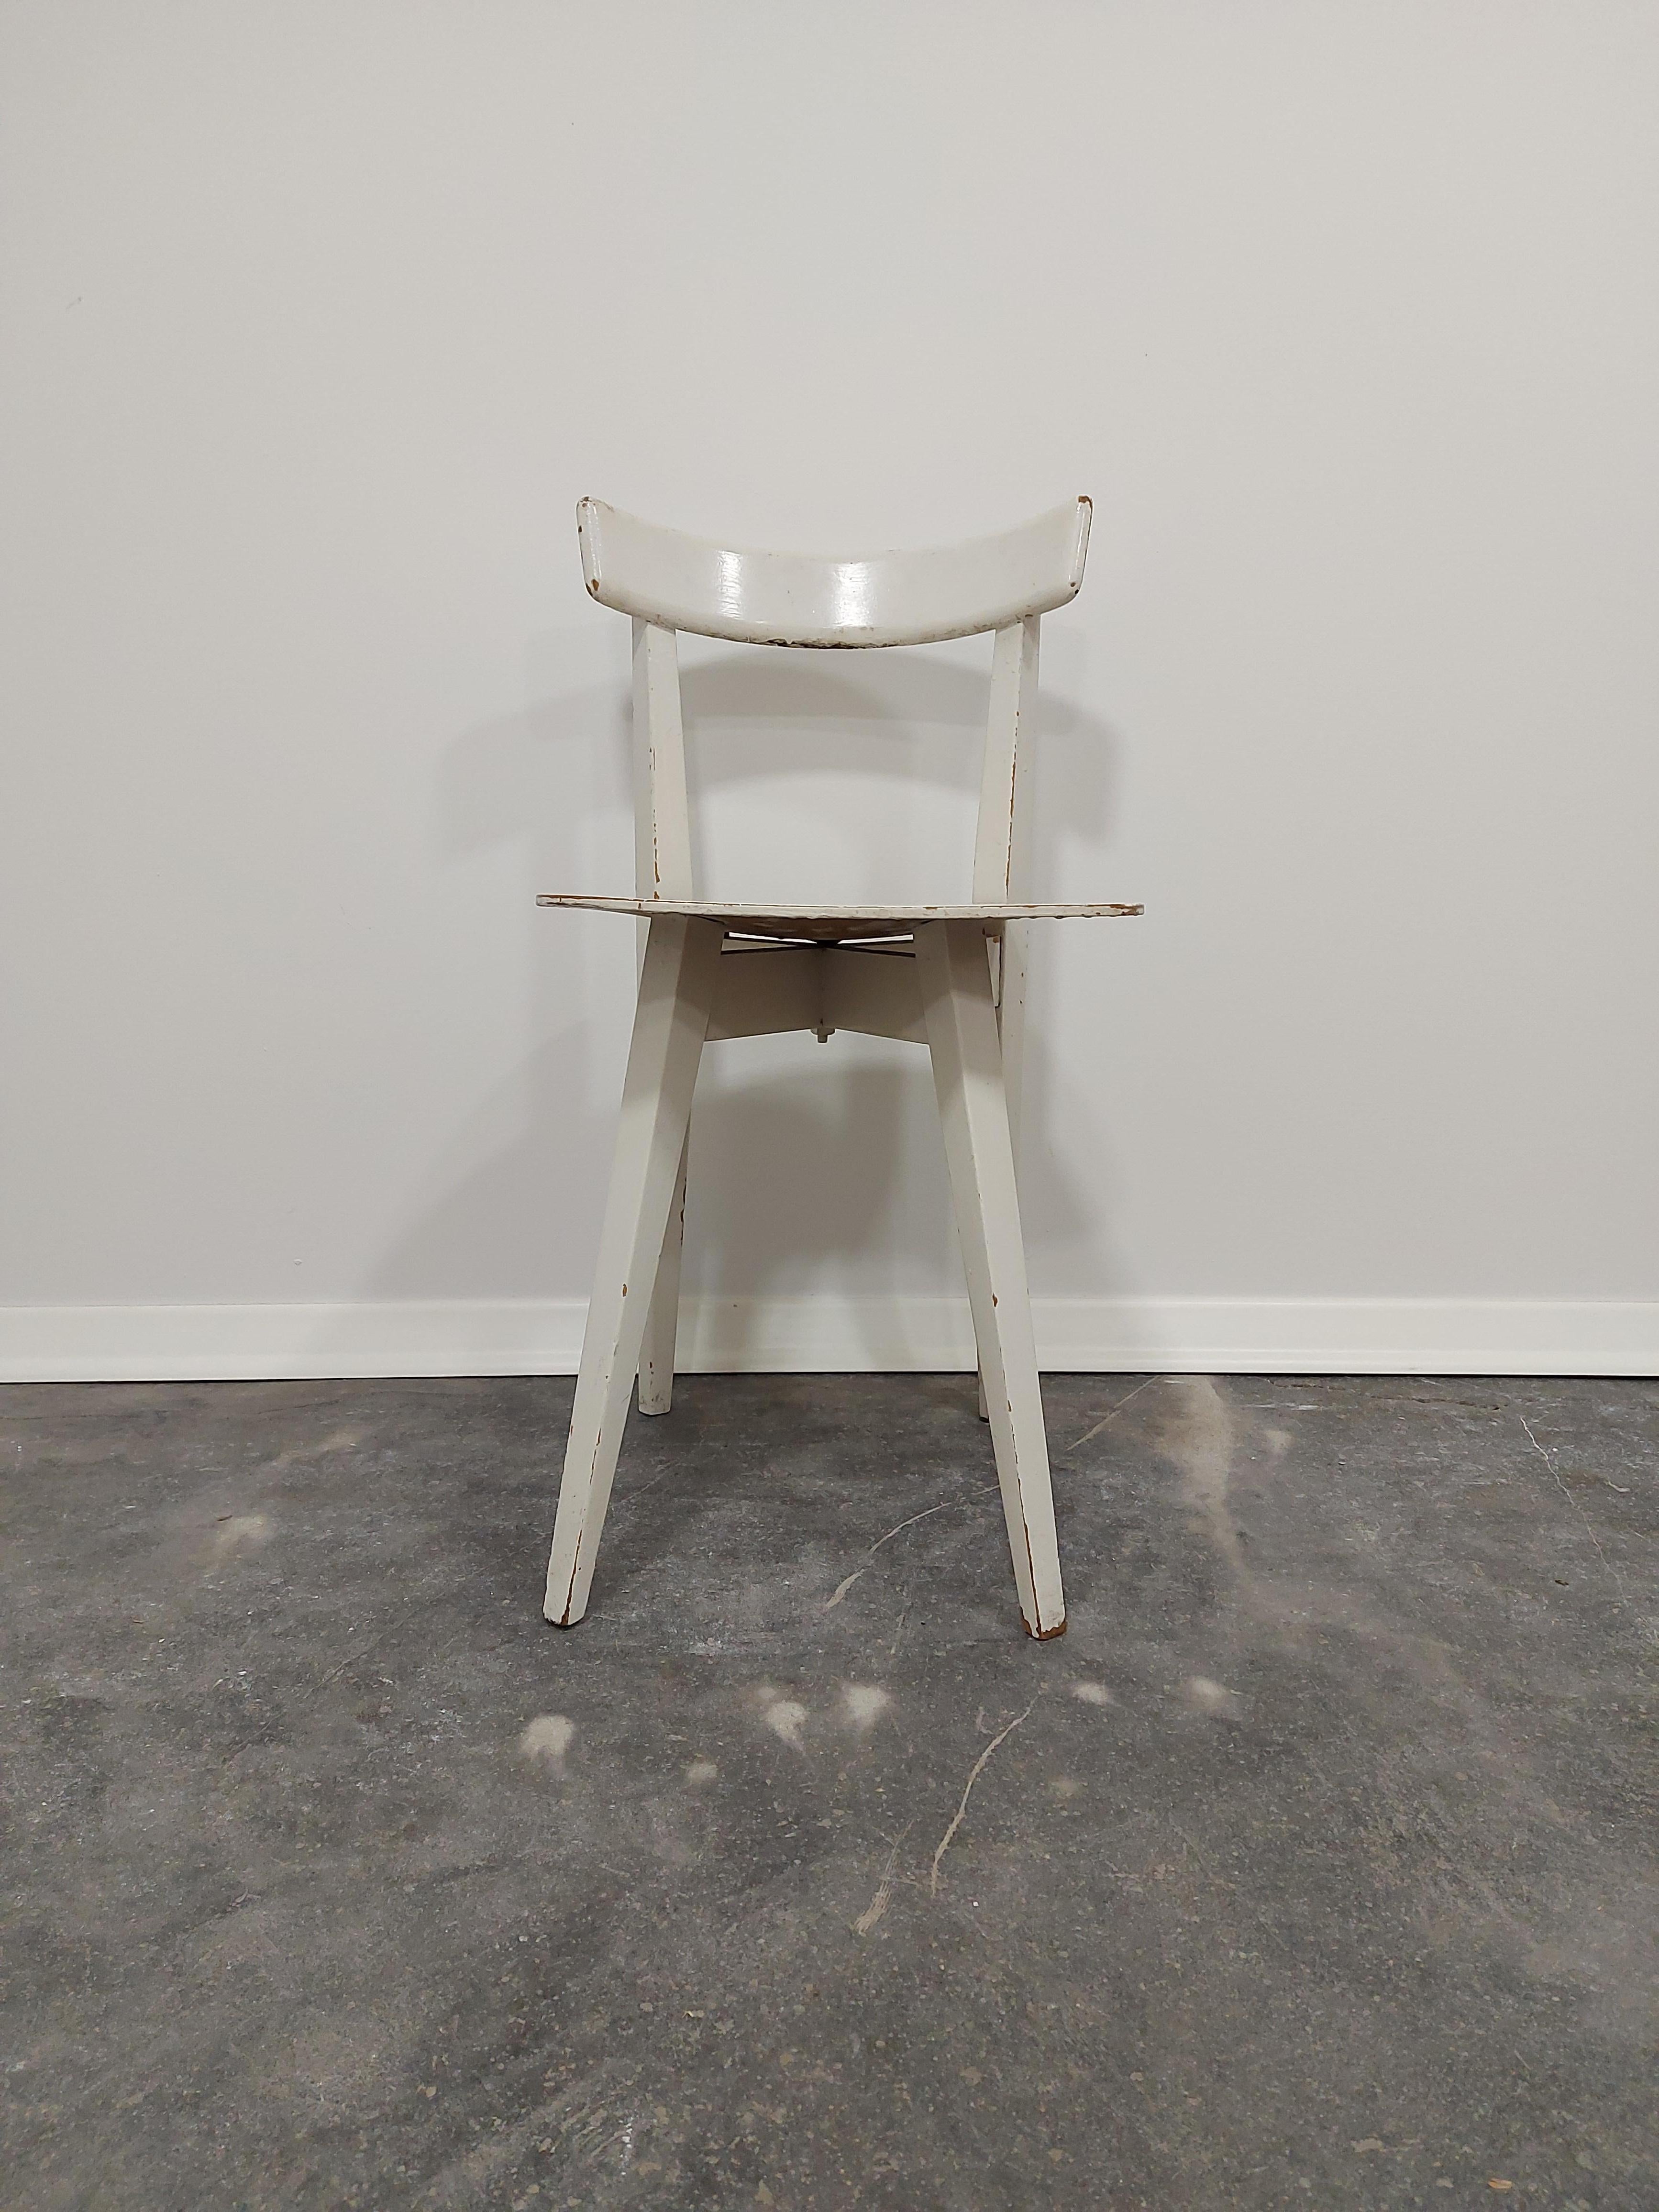 Vintage Chair

Period: 1960s

Material: wood, plywood

Colour: white

Condition: good original vintage condition, signs of use

dimensions: H = 73 cm, W = 38cm, D = 44cm, seat H = 45.50